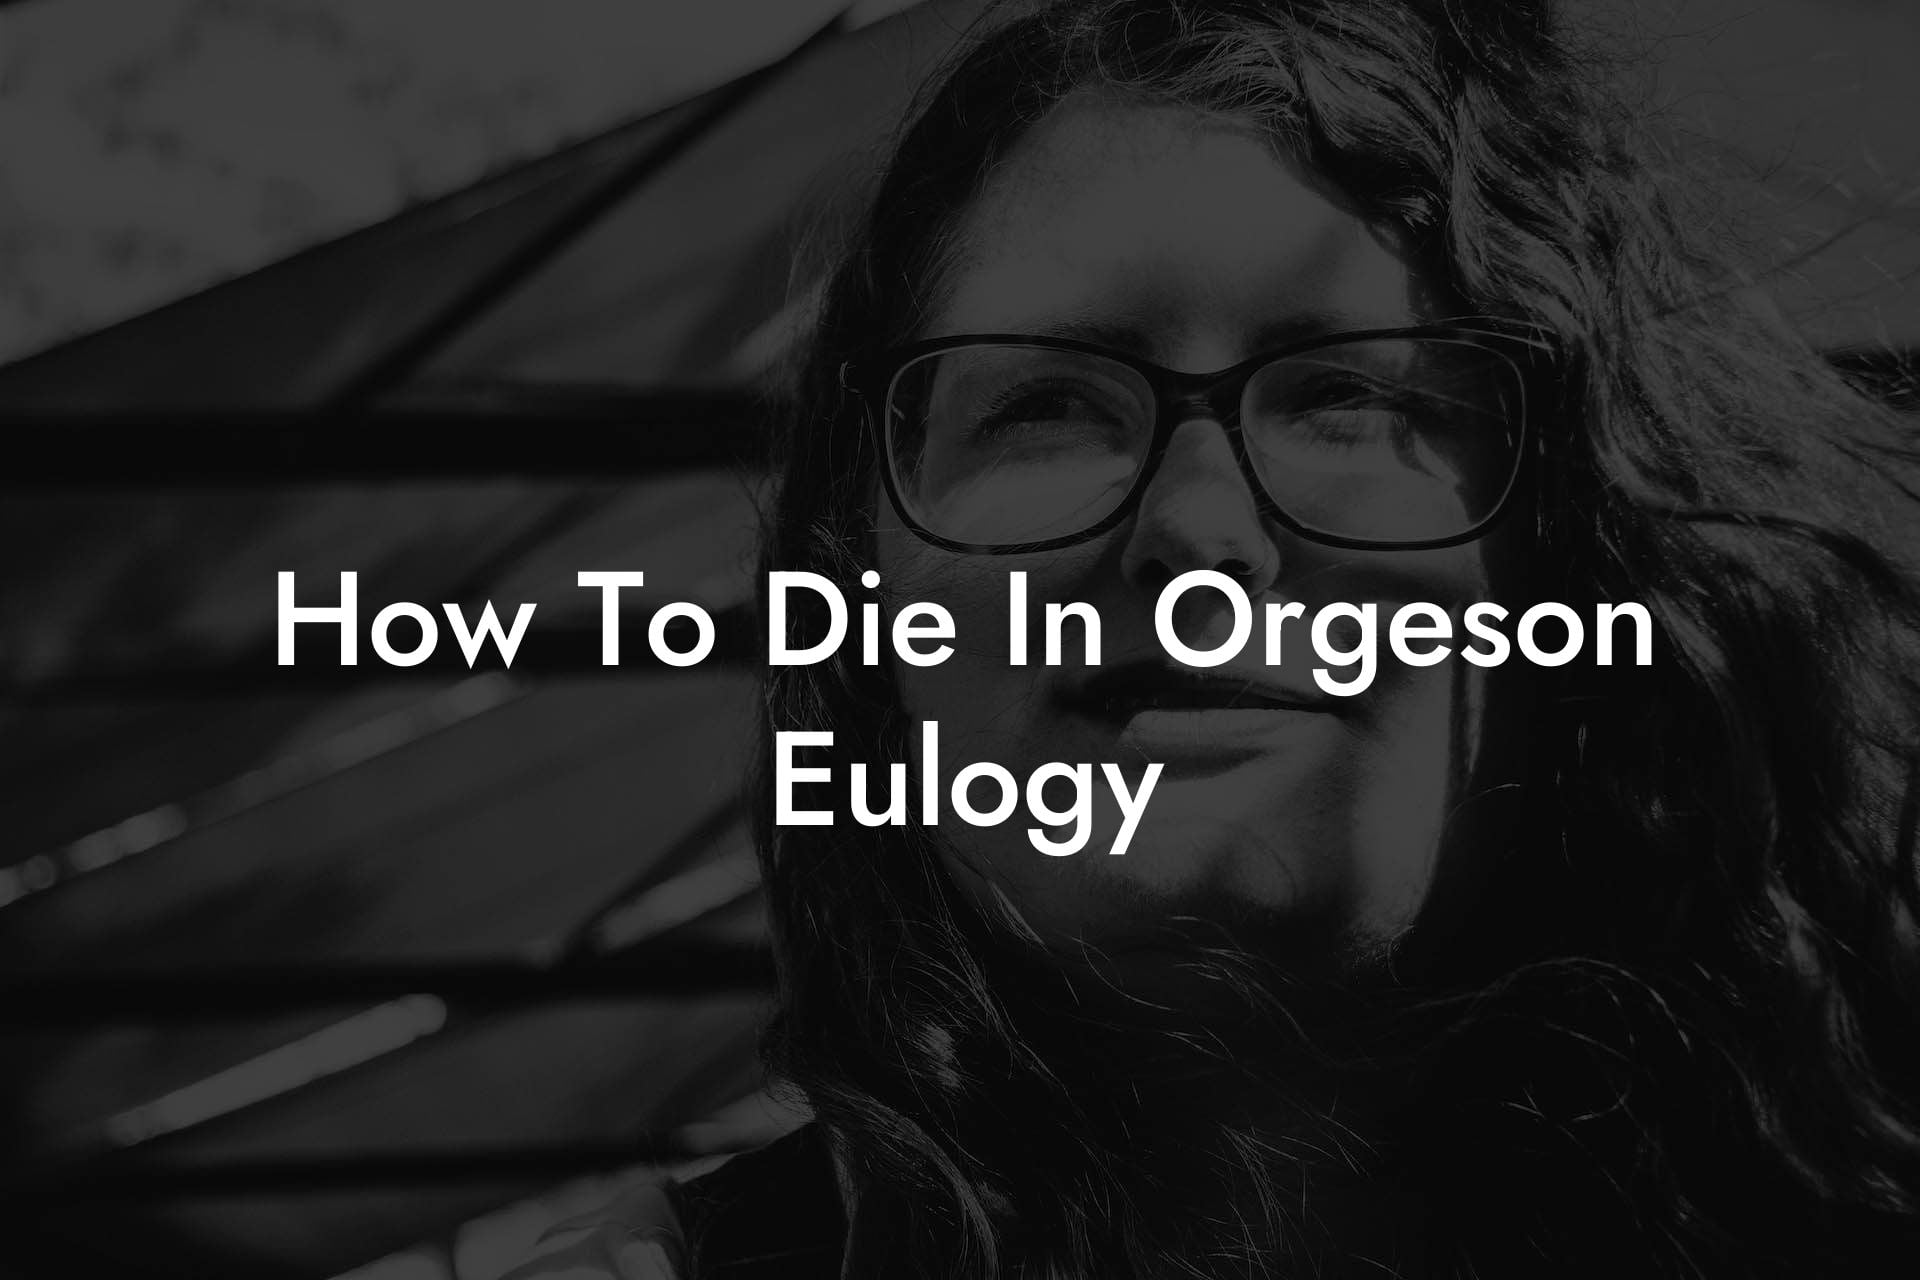 How To Die In Orgeson Eulogy